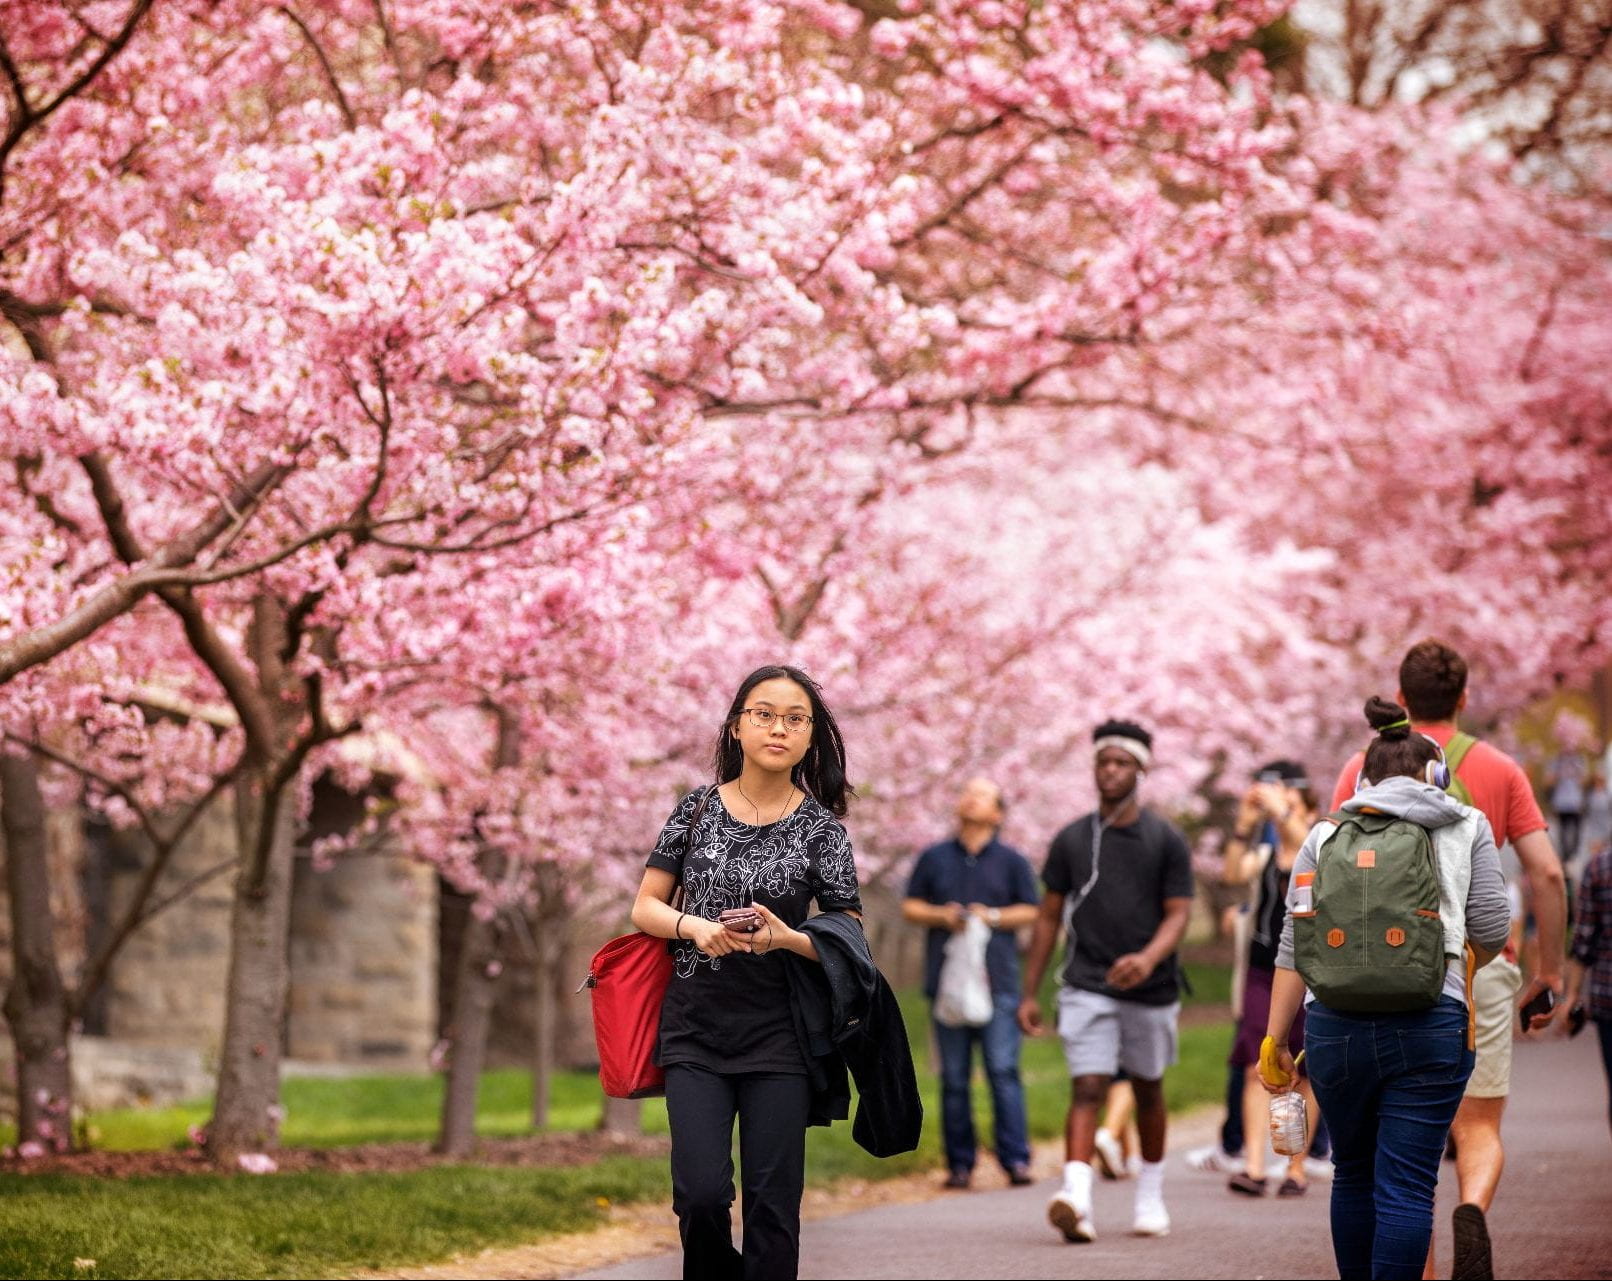 Student walking on campus amid blooming cherry trees